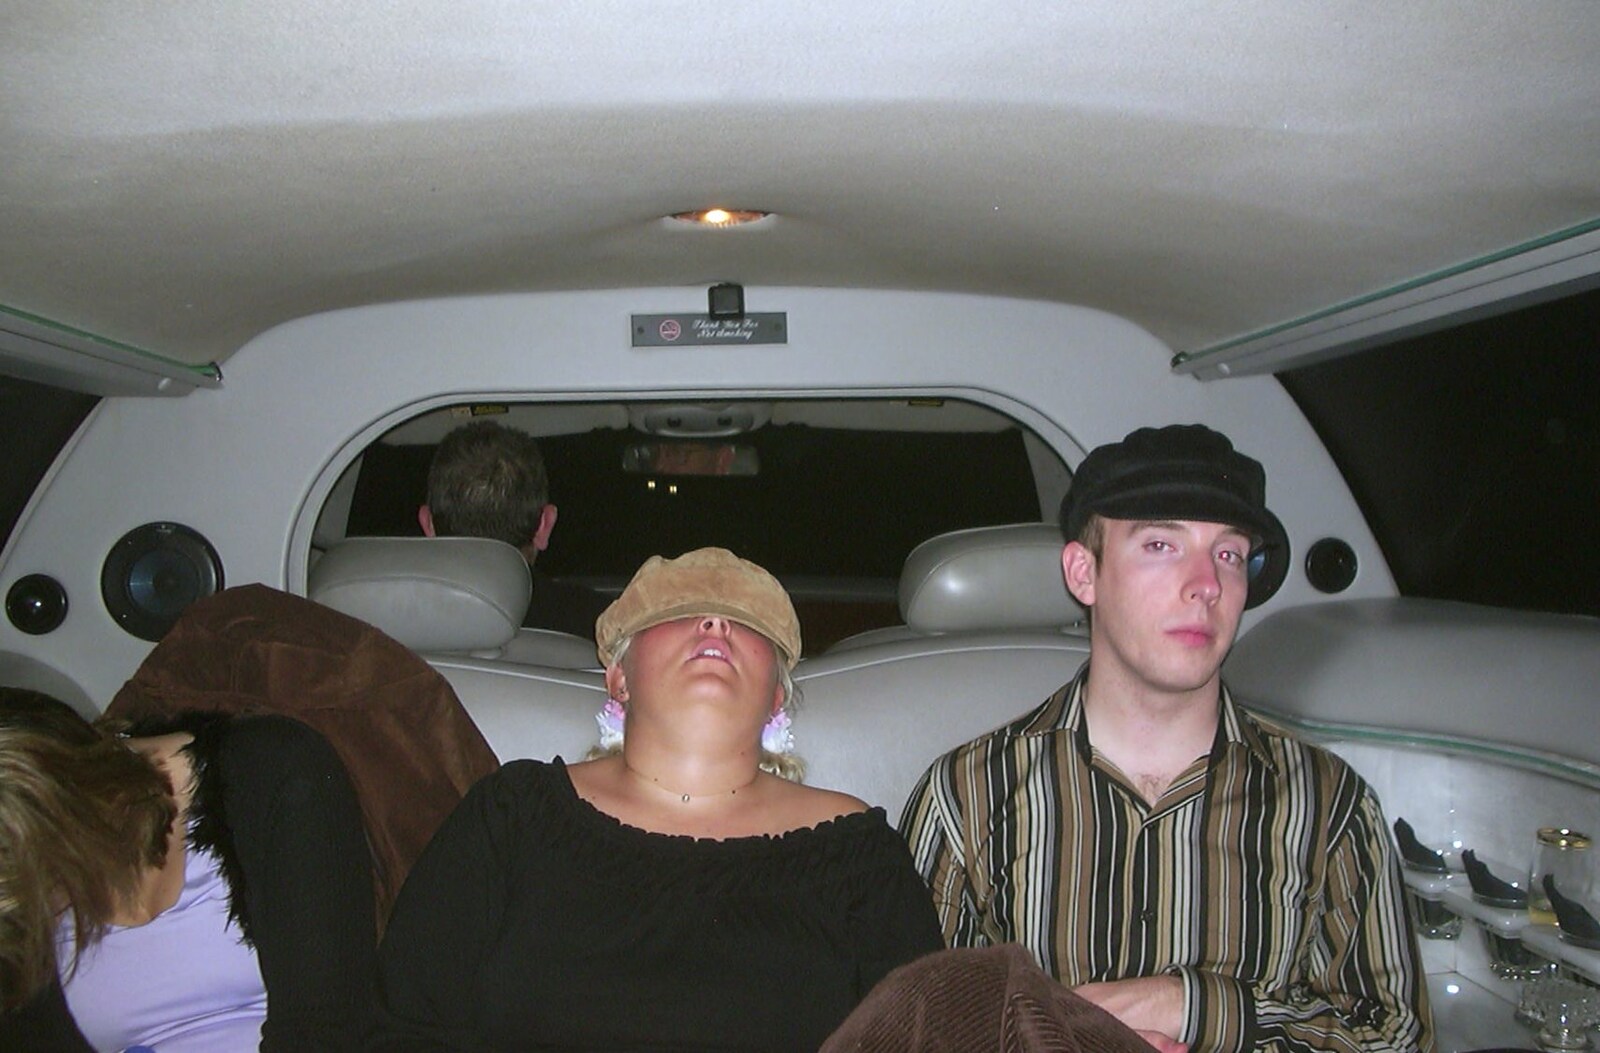 Michelle zeds out on the way back from London from 3G Lab's Carwash Nightclub by Limo, London - 27th April 2002